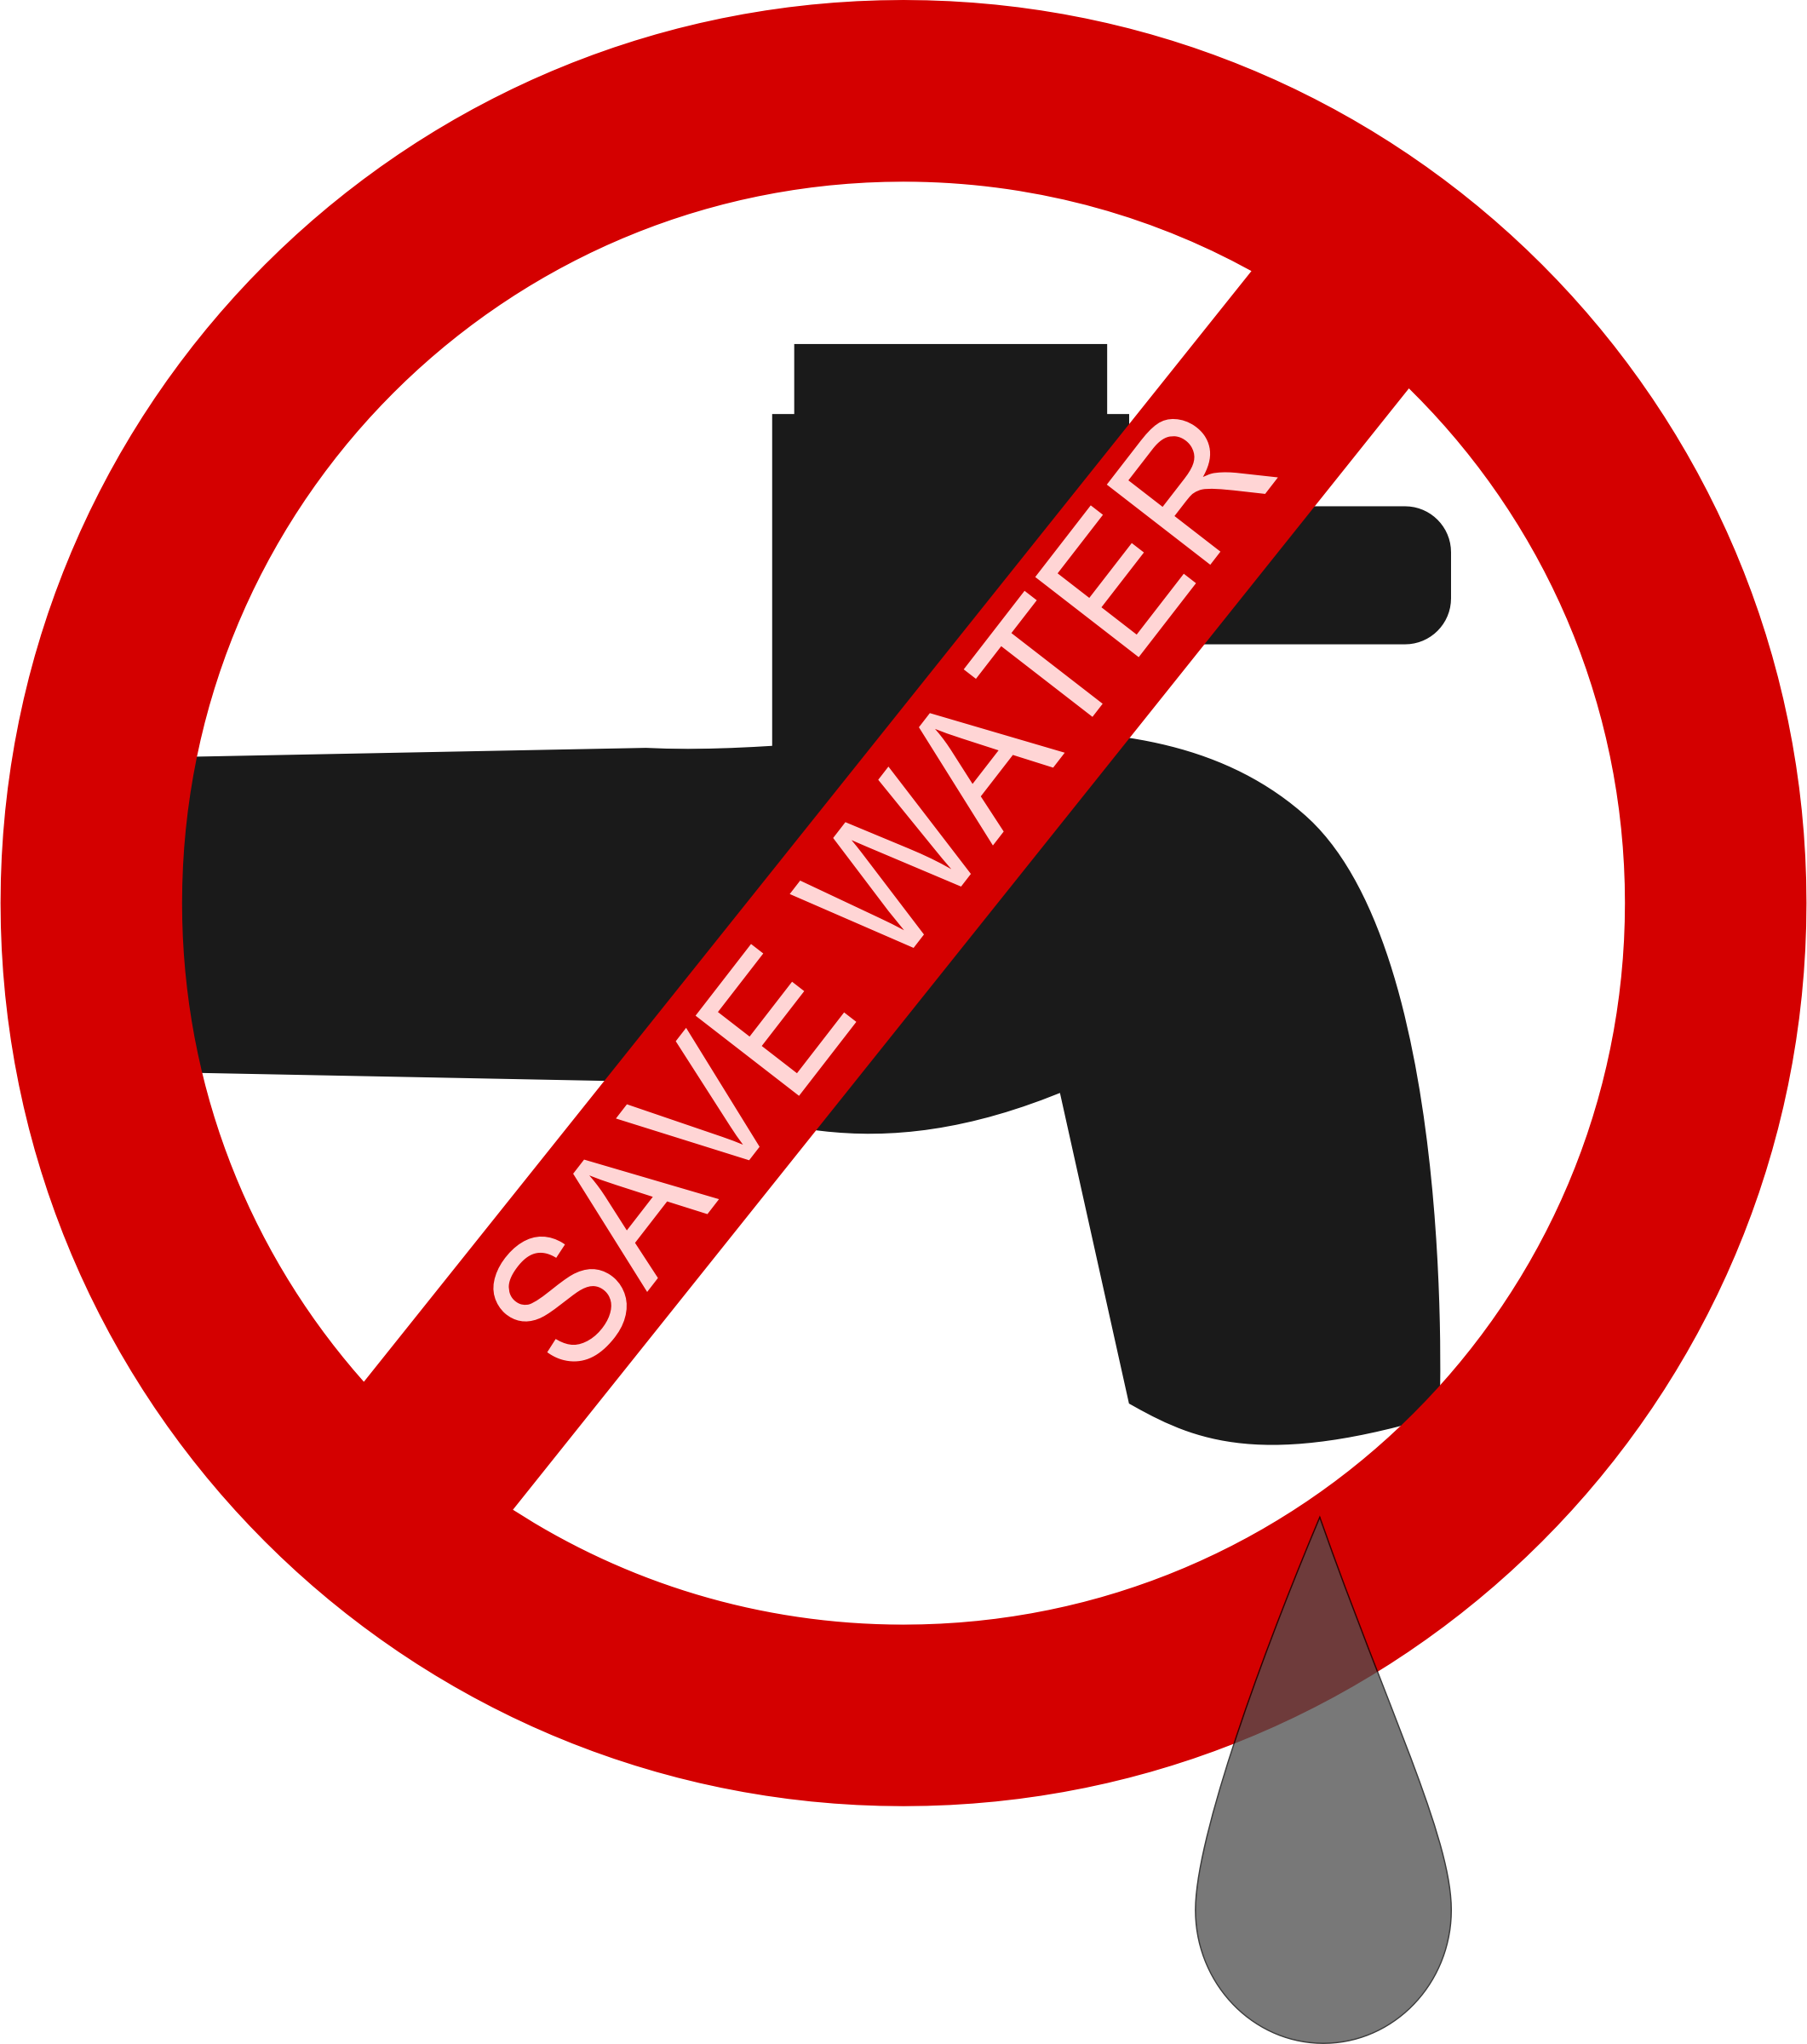 clipart on save water - Clipground